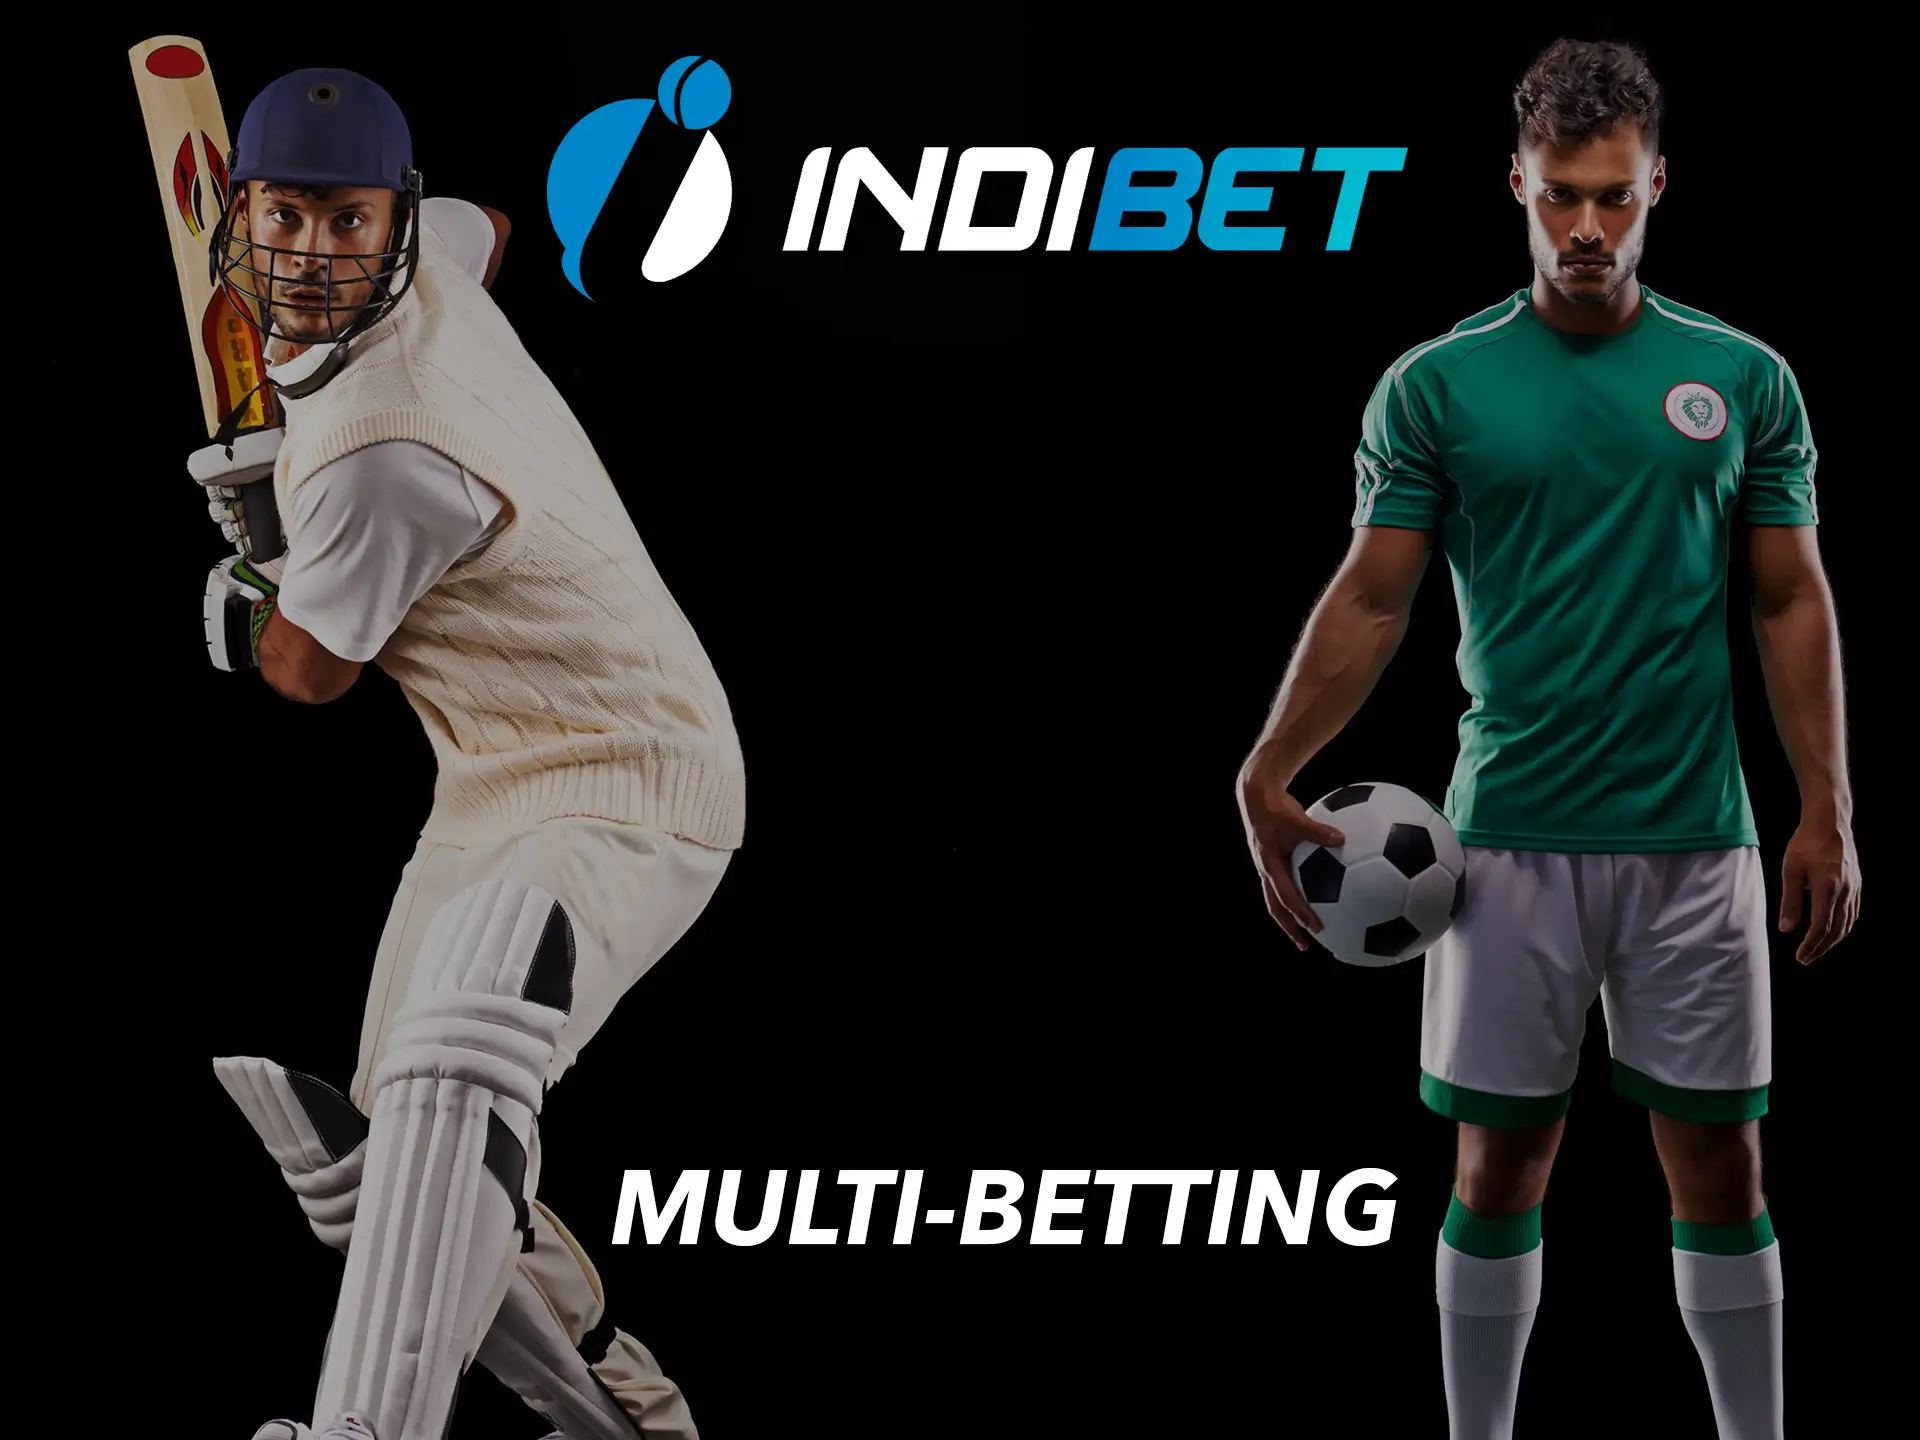 Keep a record of your bets on different sports matches in Indibet's multi-betting mode.